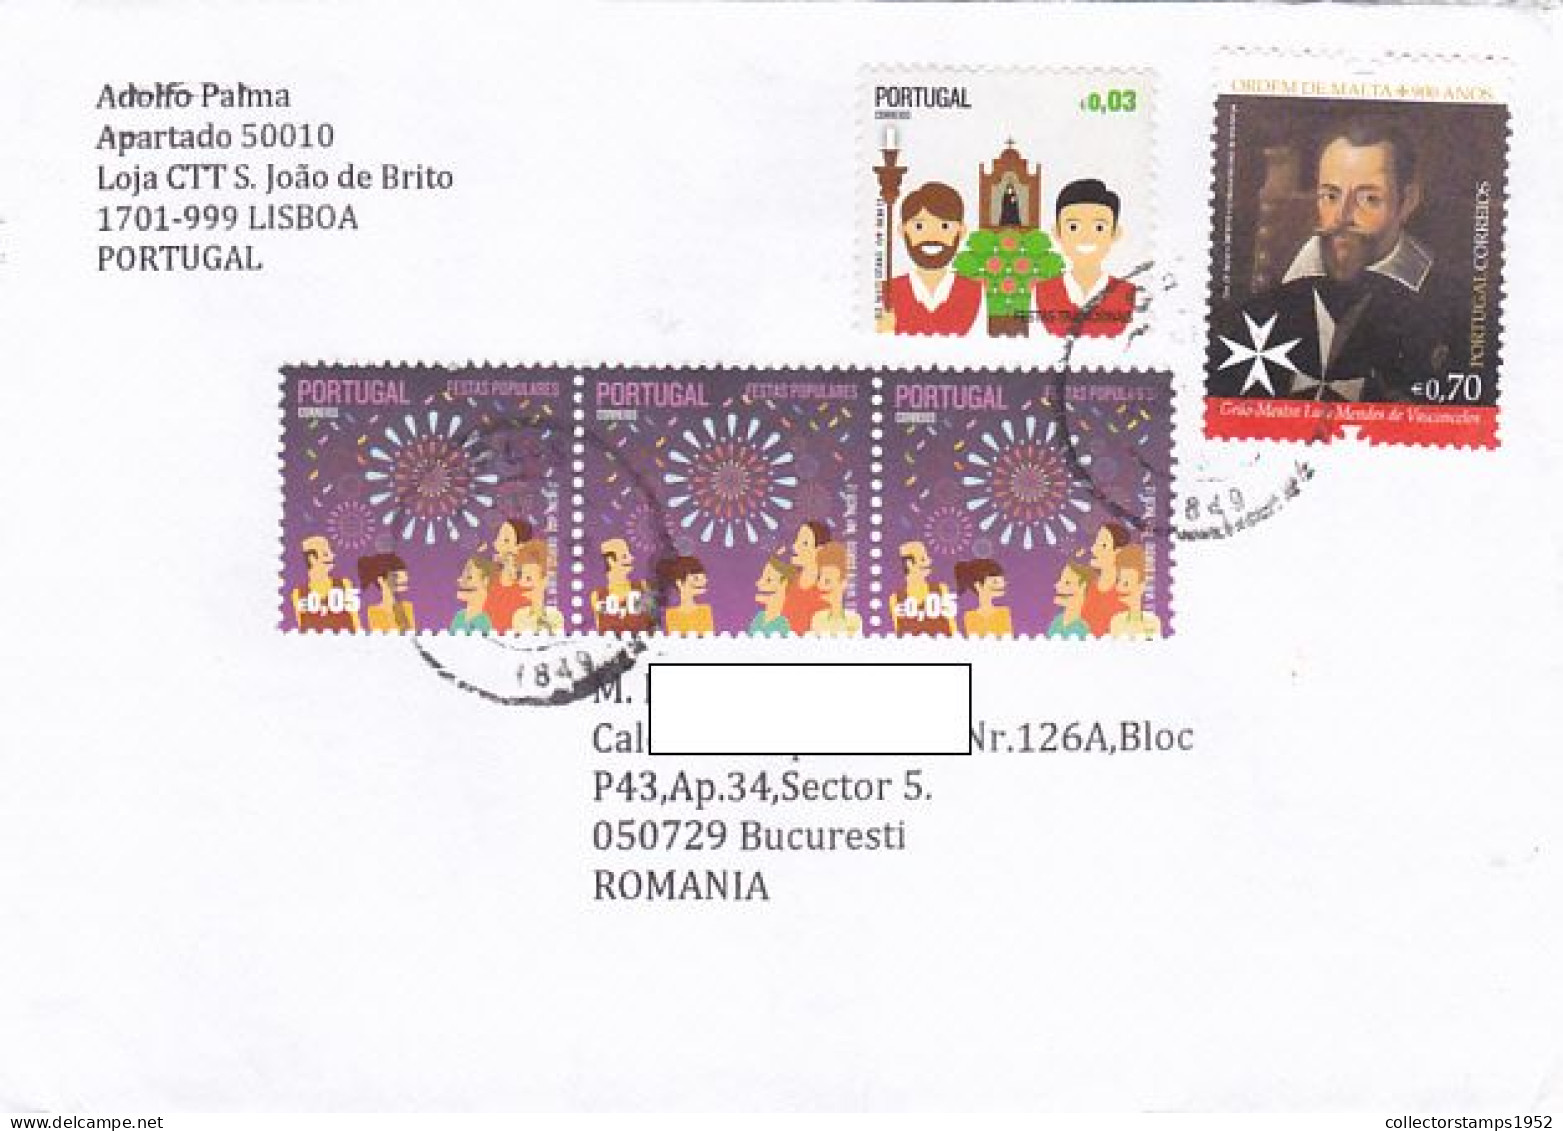 FESTIVALS, ORDER OF MALTA, FINE STAMPS ON COVER, 2021, PORTUGAL - Covers & Documents